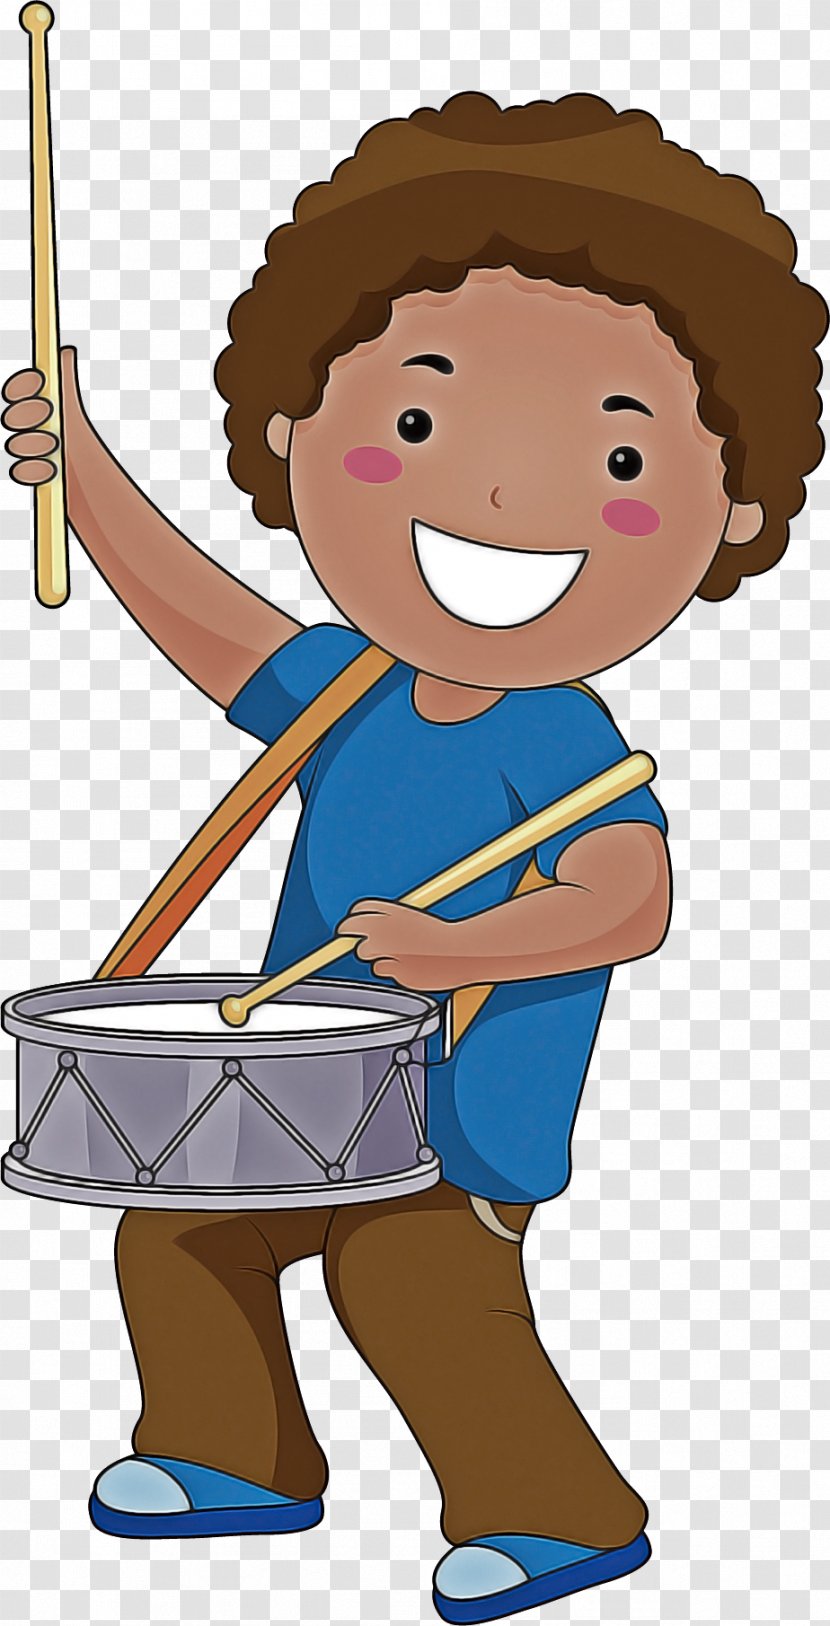 Cartoon Clip Art Drum Marching Percussion Drummer - Musical Instrument Play Transparent PNG